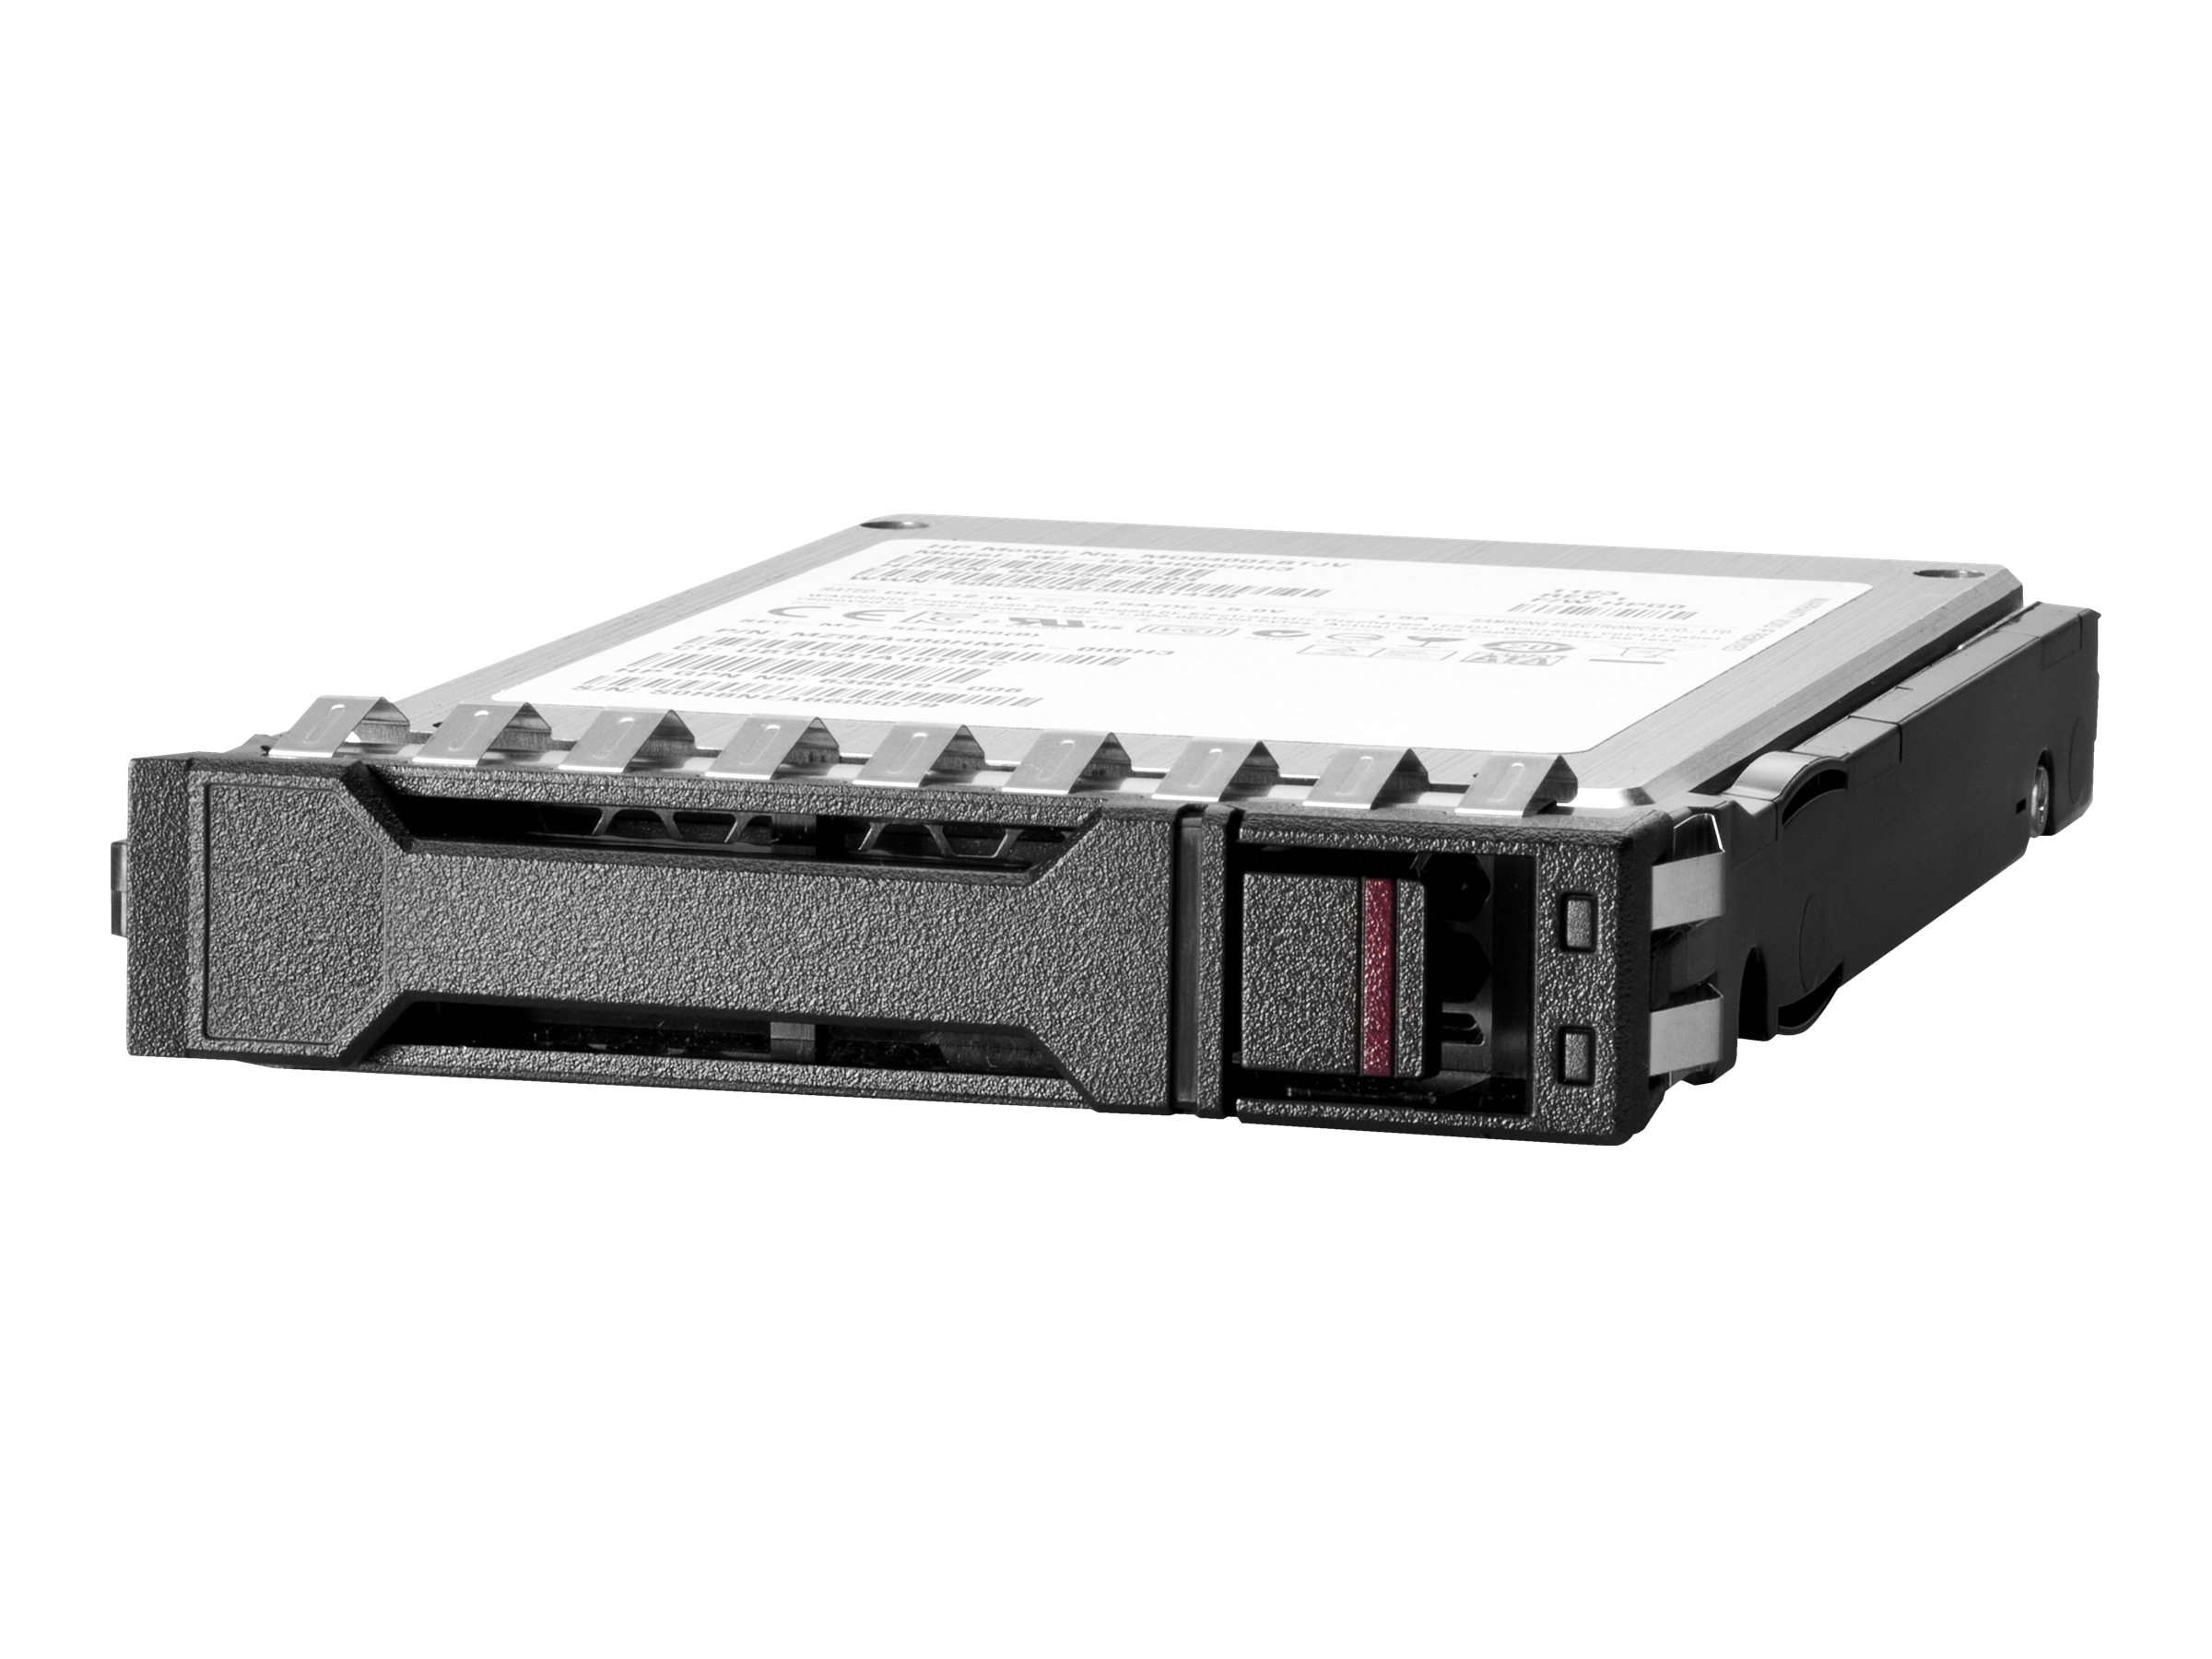 HPE PM897 - SSD - Mixed Use - 480 GB - Hot-Swap - 2.5" SFF (6.4 cm SFF)